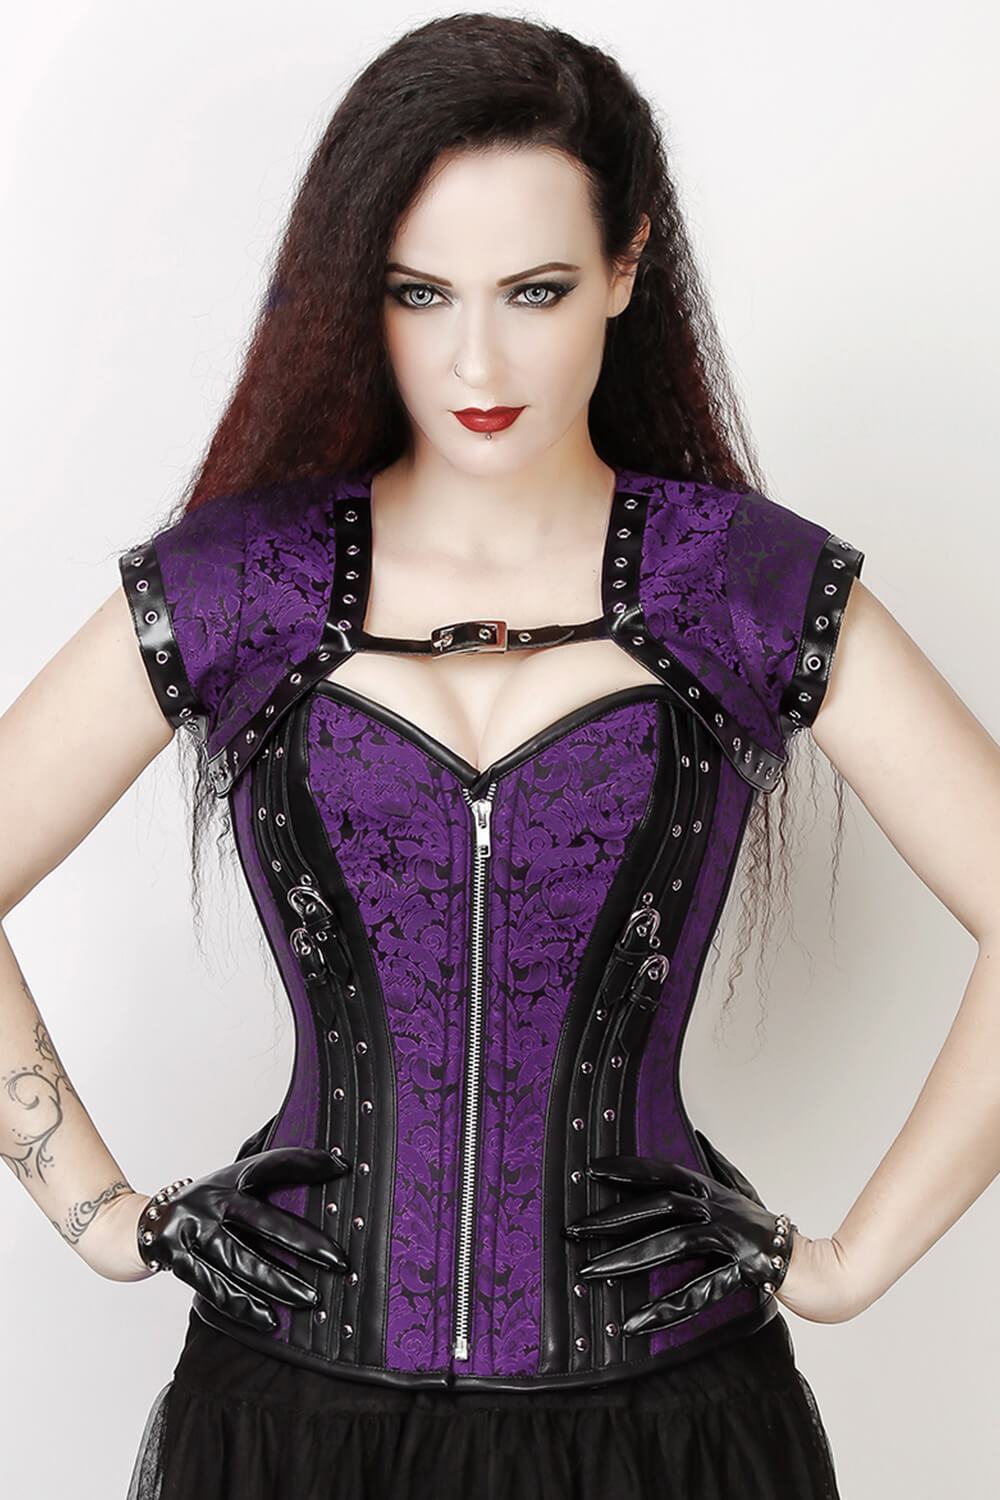 Beautiful designs of new Custom Made Purple Overbust Corset right here